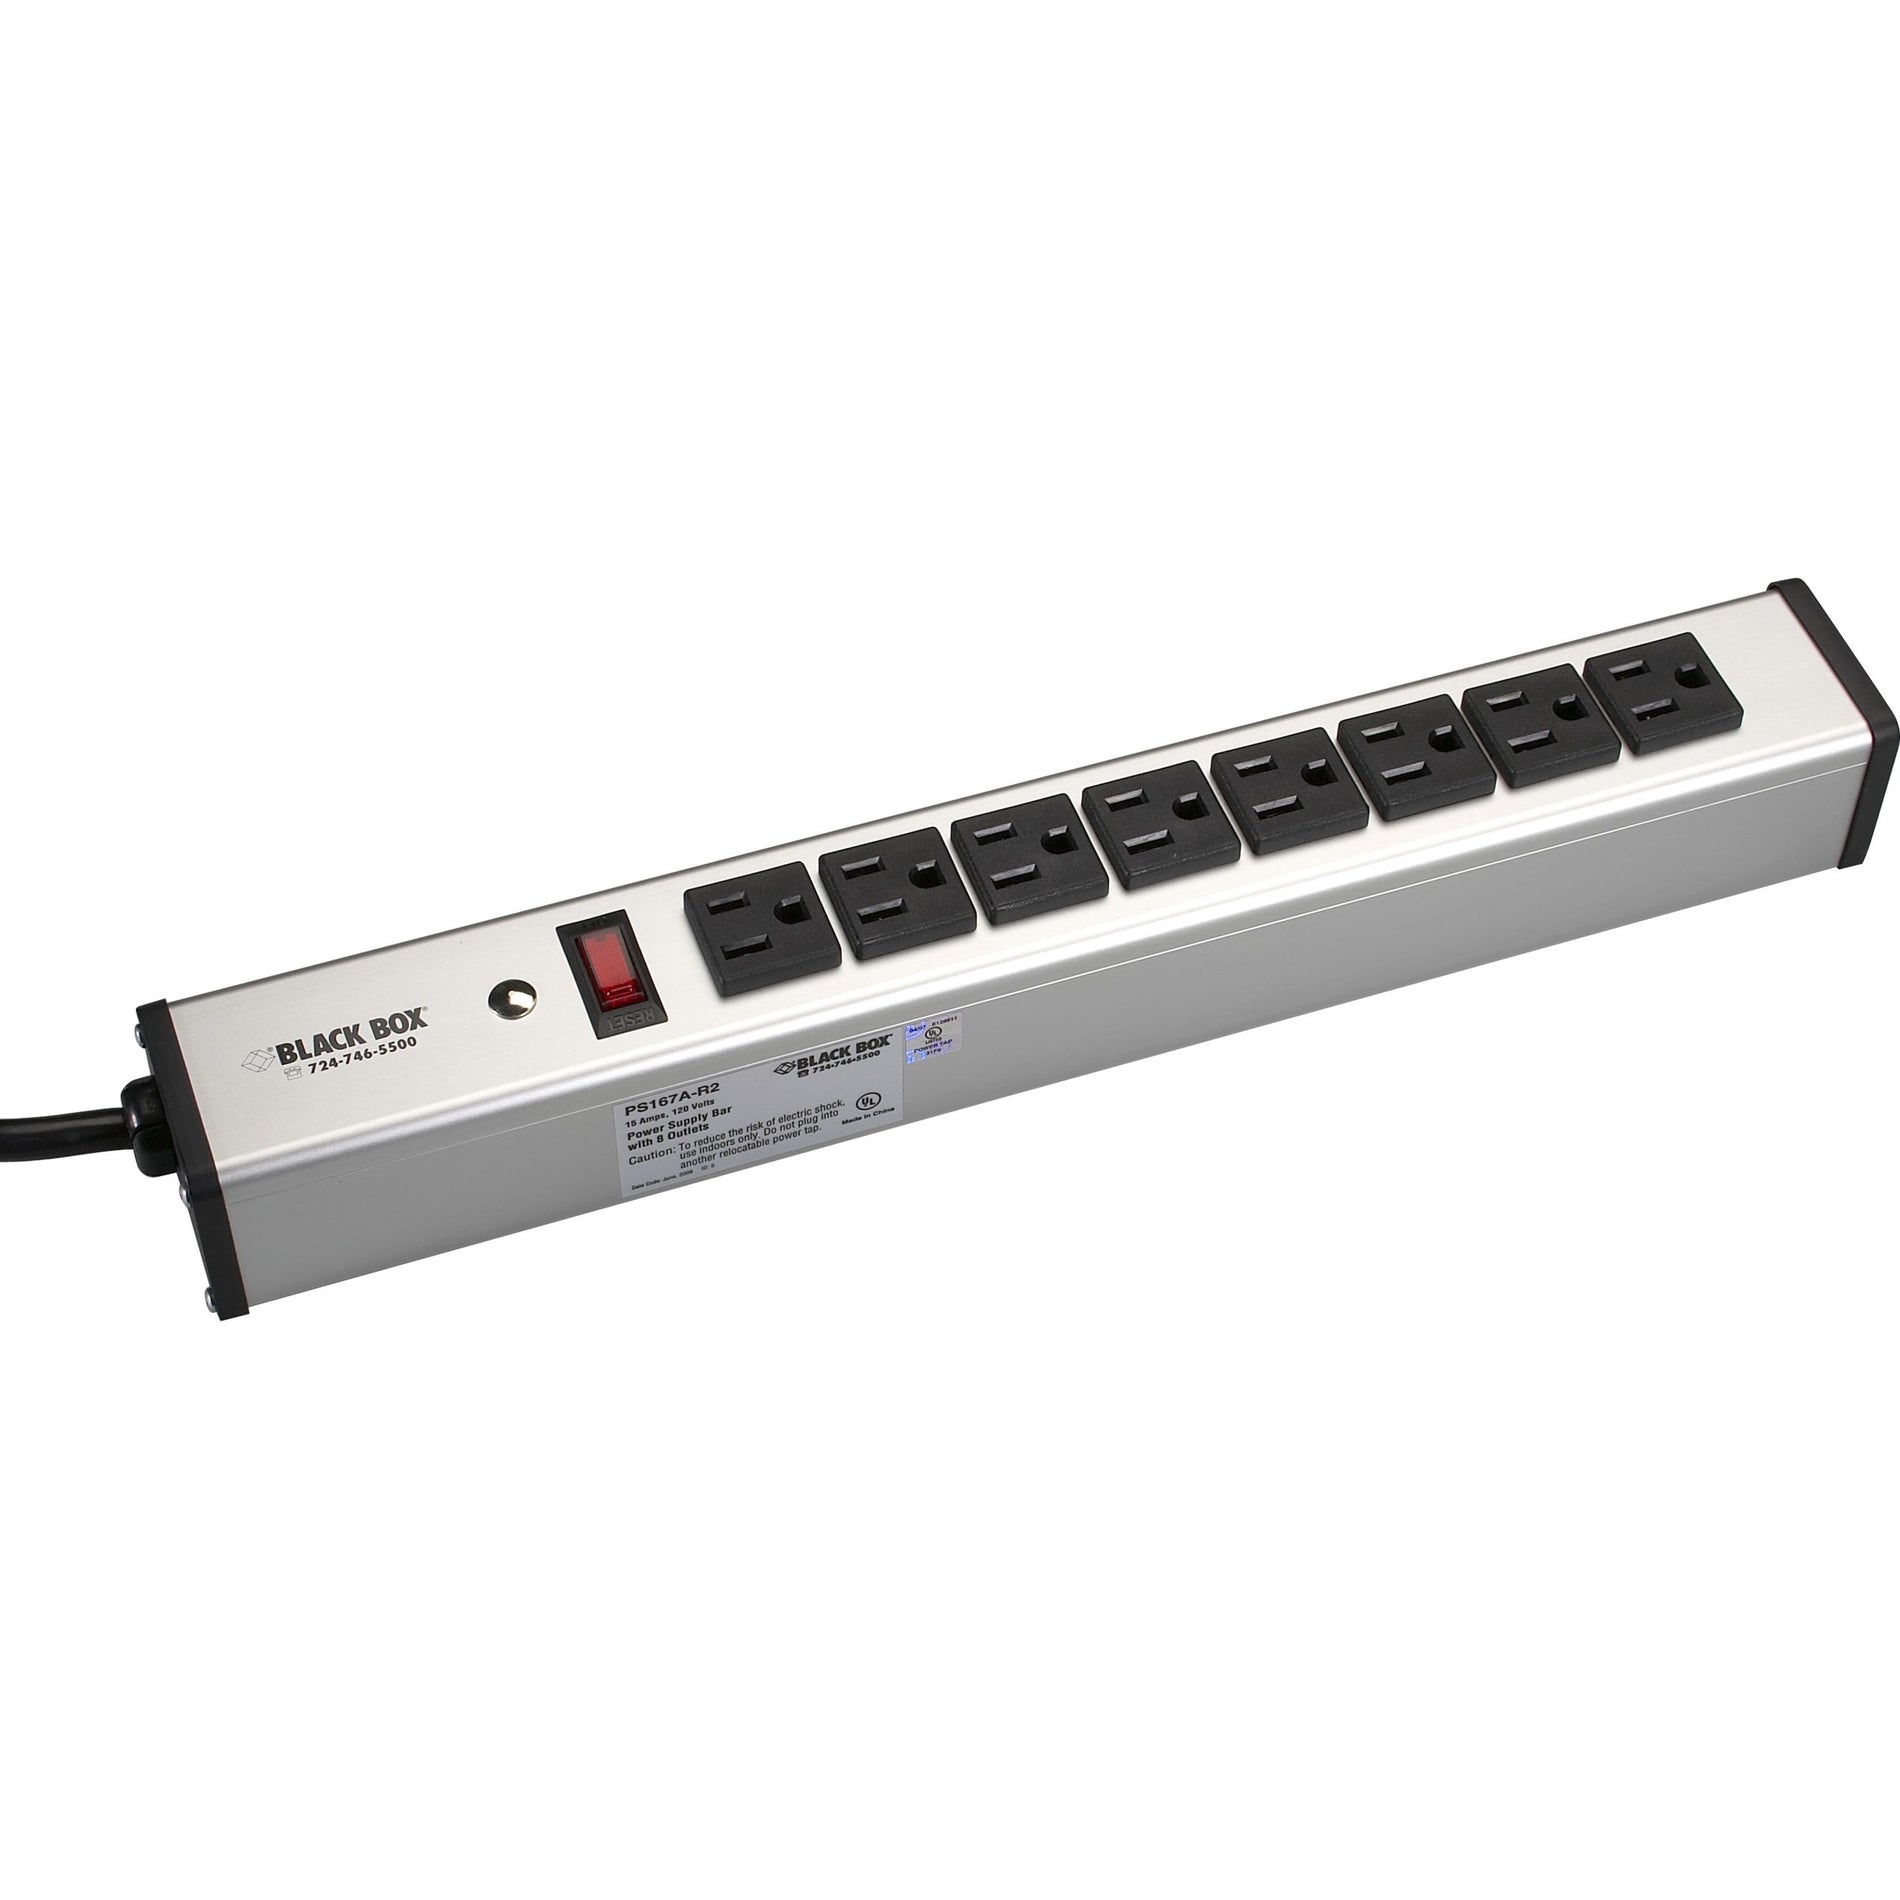 Black Box PS167A-R2 Power Strip - 8-Outlet, 15-ft. Cord, FCC Certified